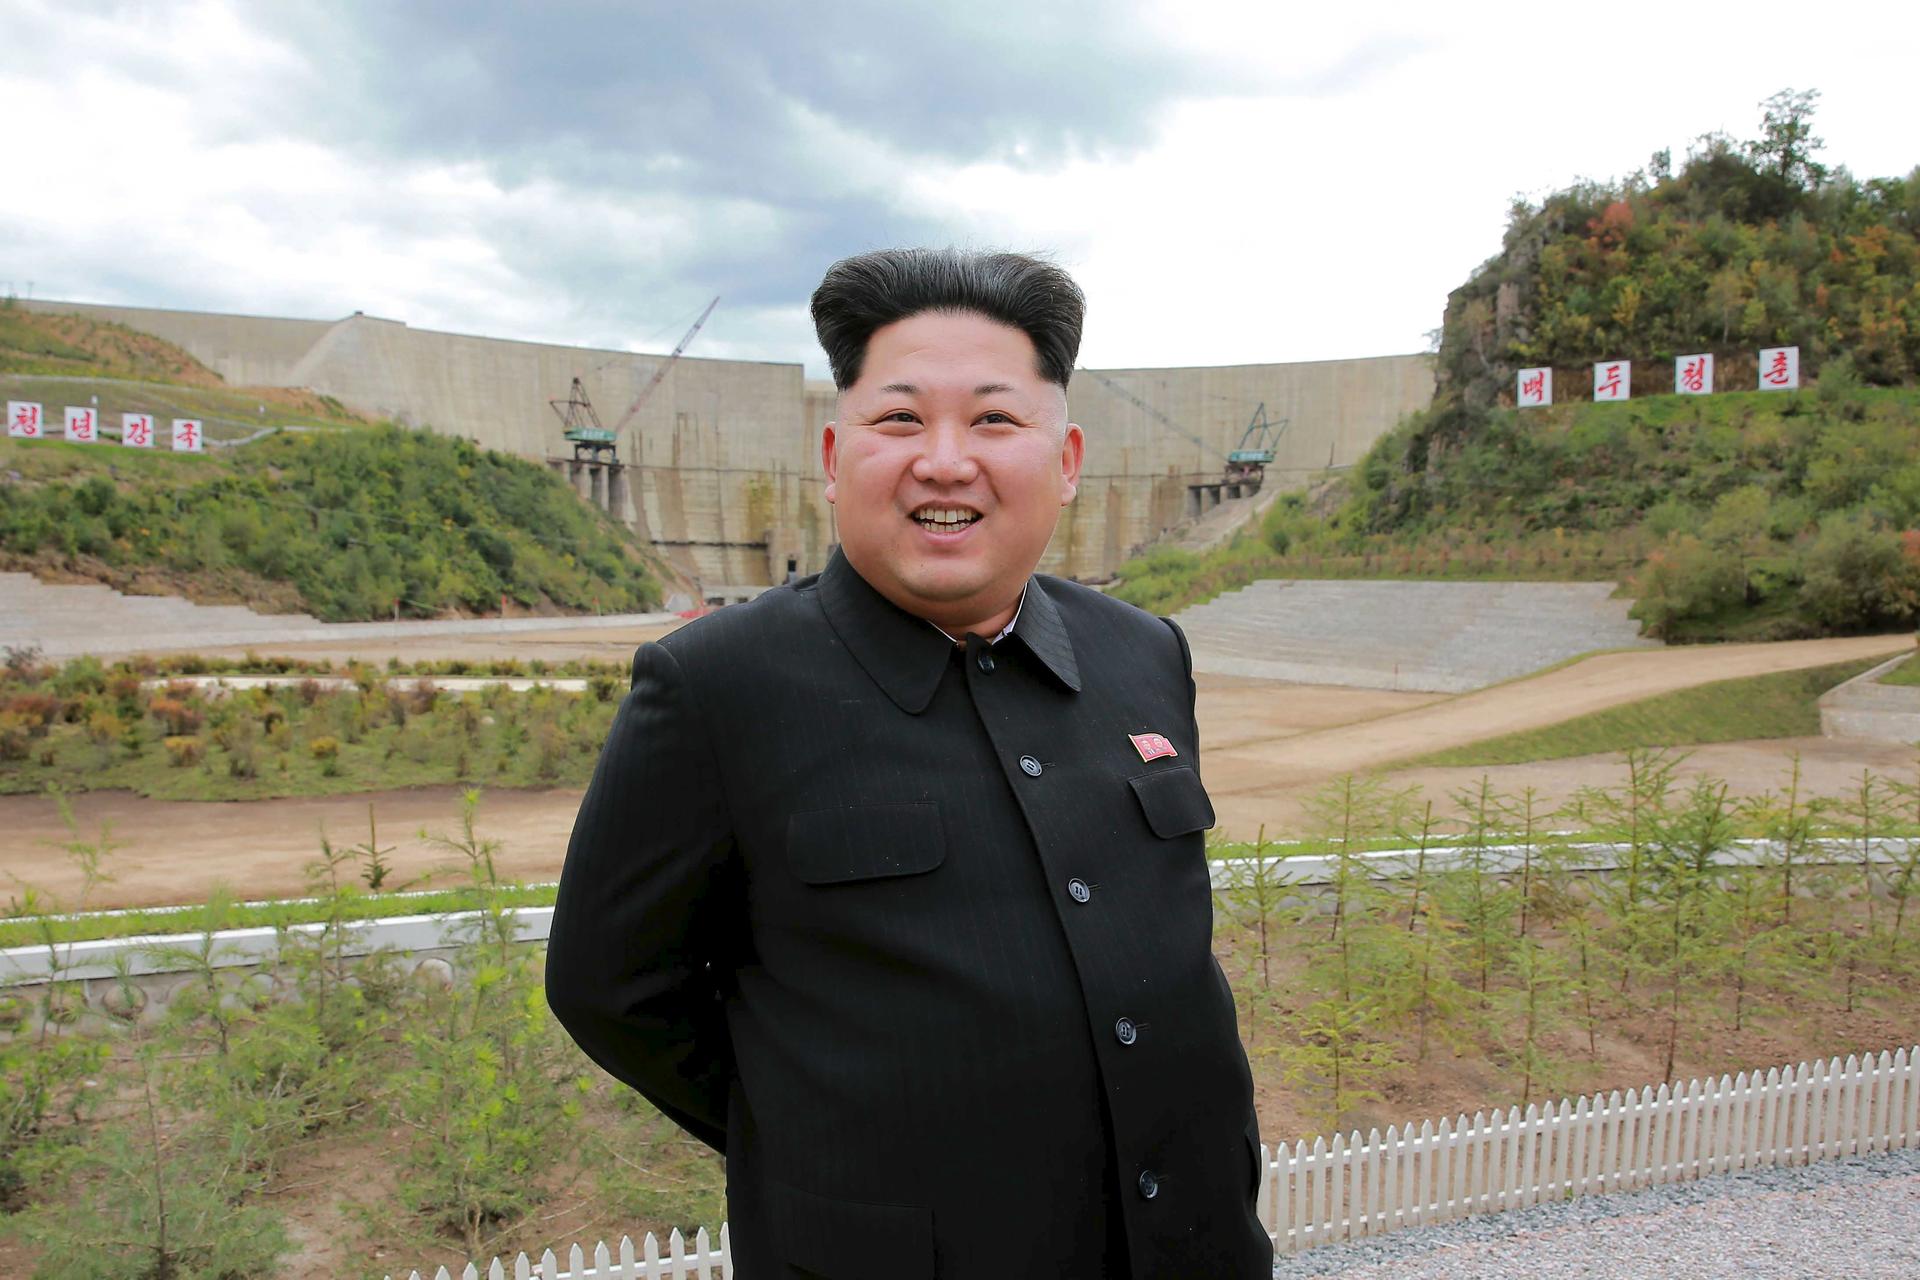 North Korean leader Kim Jong Un smiles during his visit to the construction site of the Paektusan Hero Youth Power Station near completion in this undated photo released by North Korea's Korean Central News Agency (KCNA) in Pyongyang September 14, 2015.